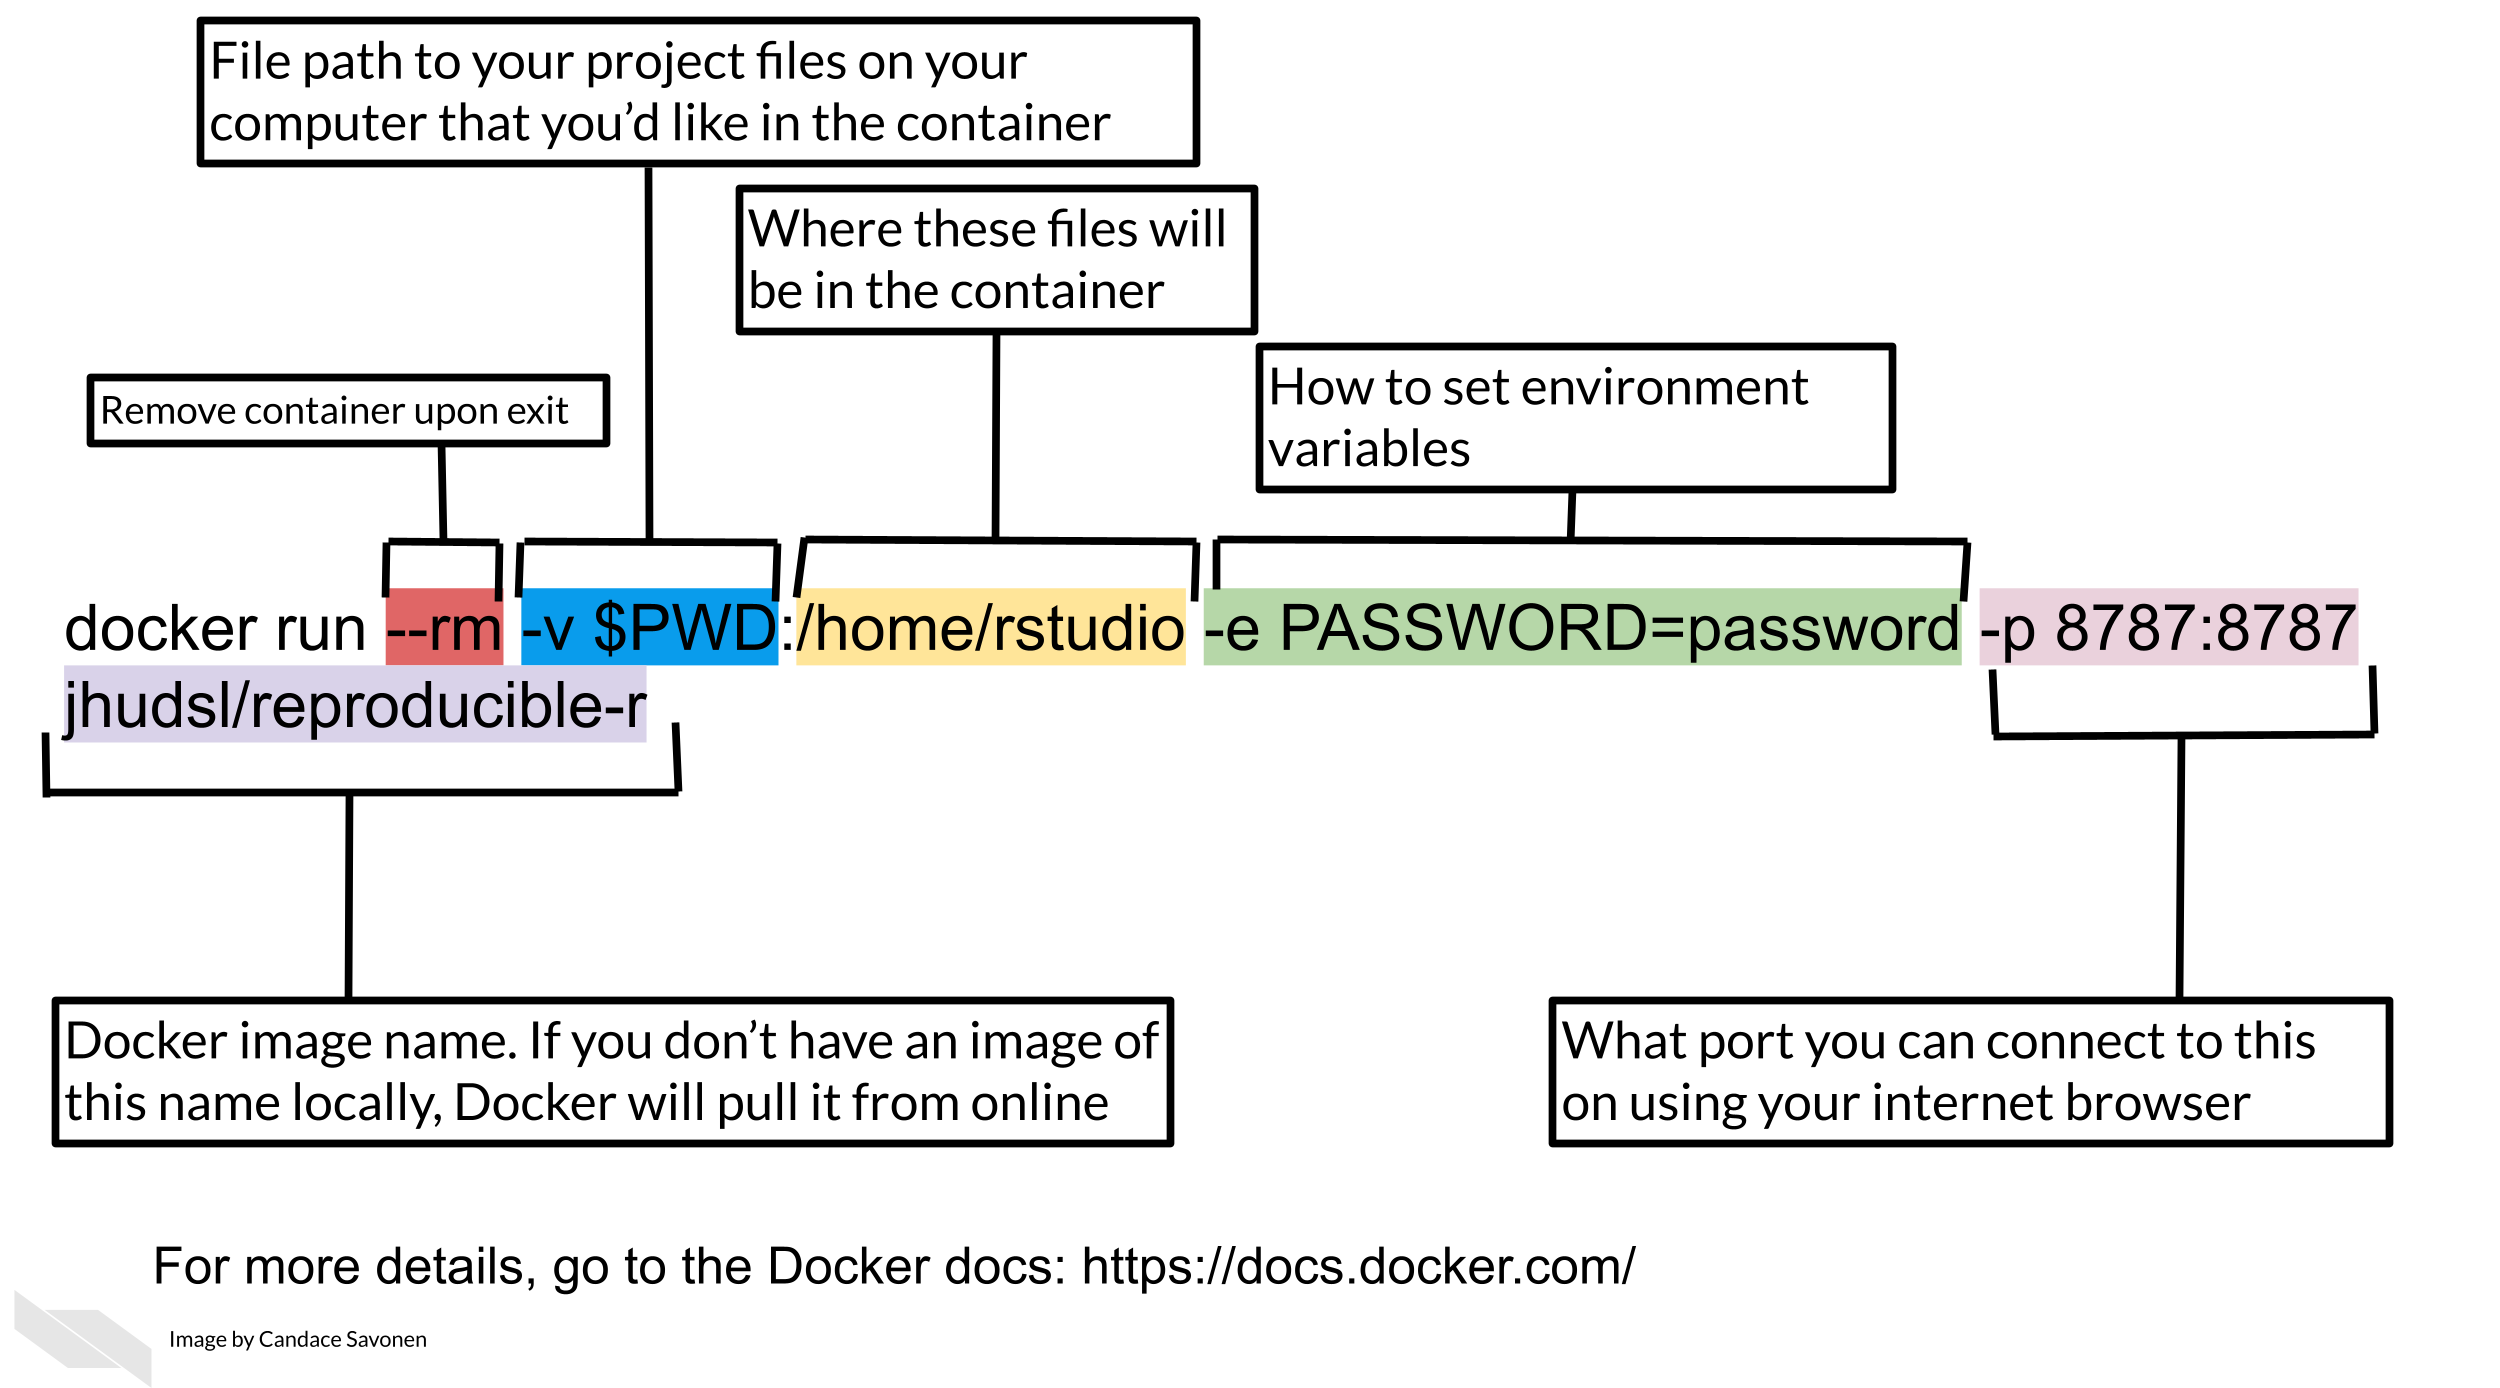 A breakdown of the docker run command. The remove option (`--rm`) automatically removes the container when docker run exits. Dash v, the volume option is how you specify what files you’d like available in the container and where to find them. In this instance we are using the output of the pwd command (print working directory) so that wherever you run this command, the files in that directory will be available in the container. The part after the colon specifies where these files will be found in the container. Dash e, the environment option is how you can specify any environment variables you will need. In this instance for the rocker image we need to specify a password. Dash p, the port option is how you specify What port you can connect to this on using your internet browser. The last part of the docker run command says what image to run, so in this instance, we are running a container using the jhudsl/reproducible-r image.